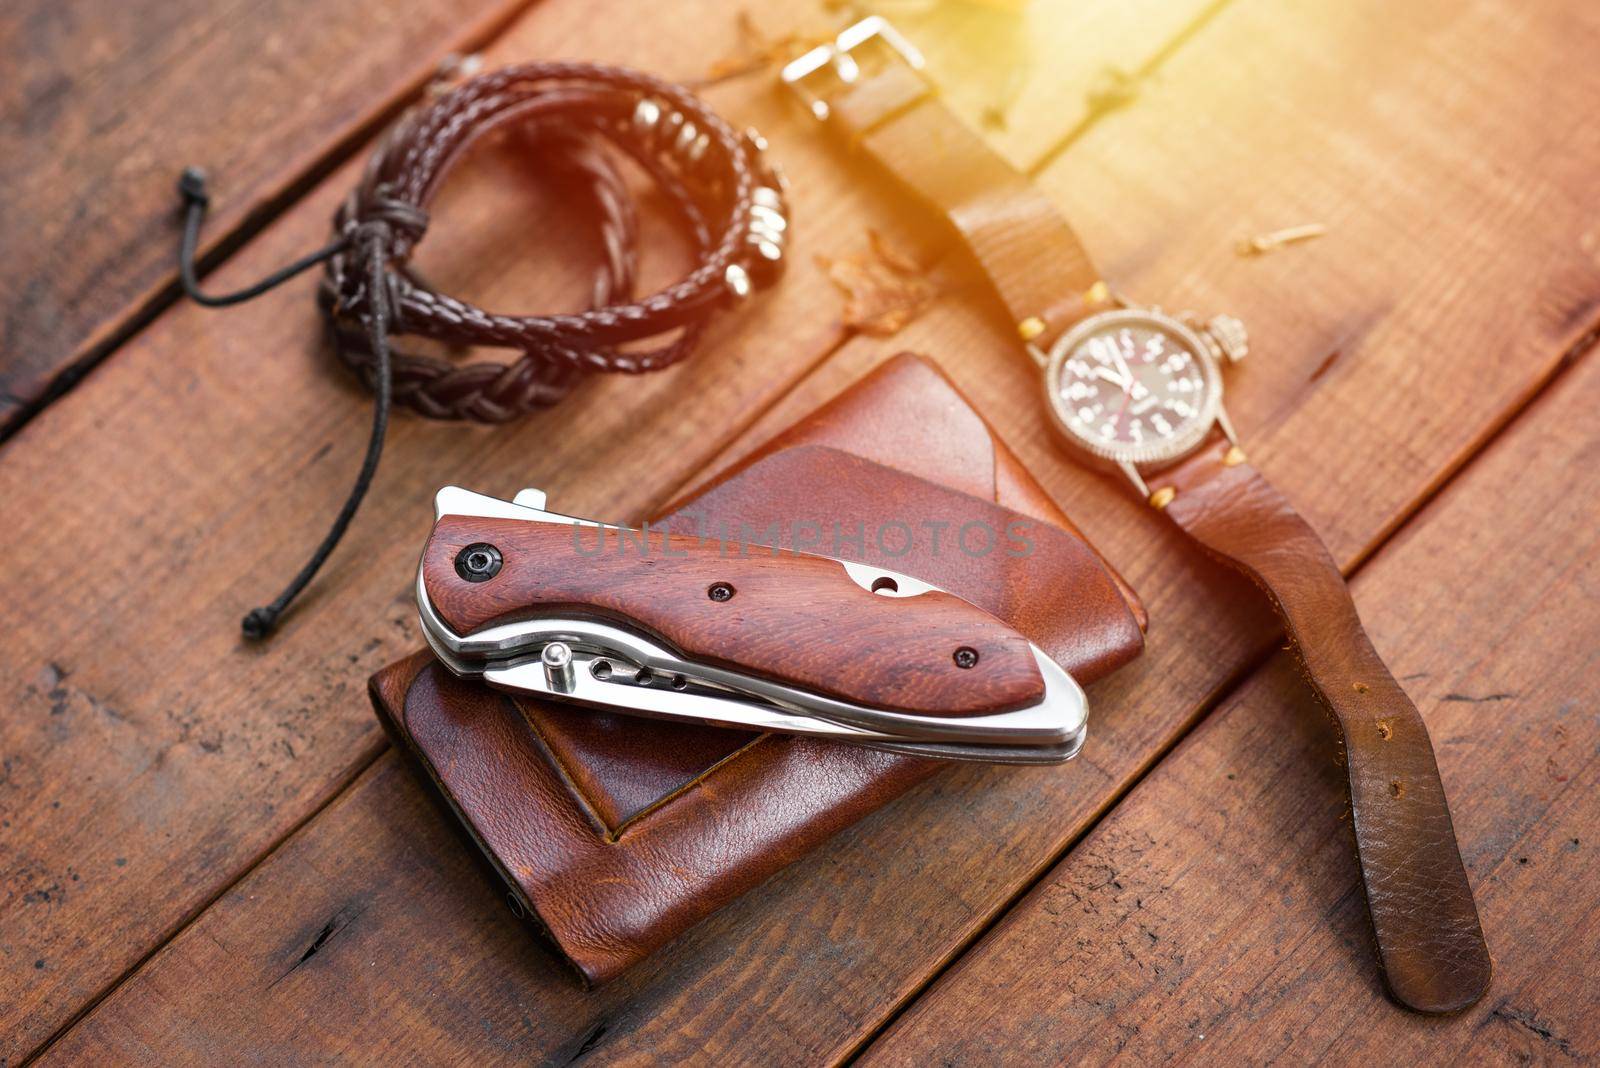 many men's items on wood plank, closeup at stainless steel folding knife.